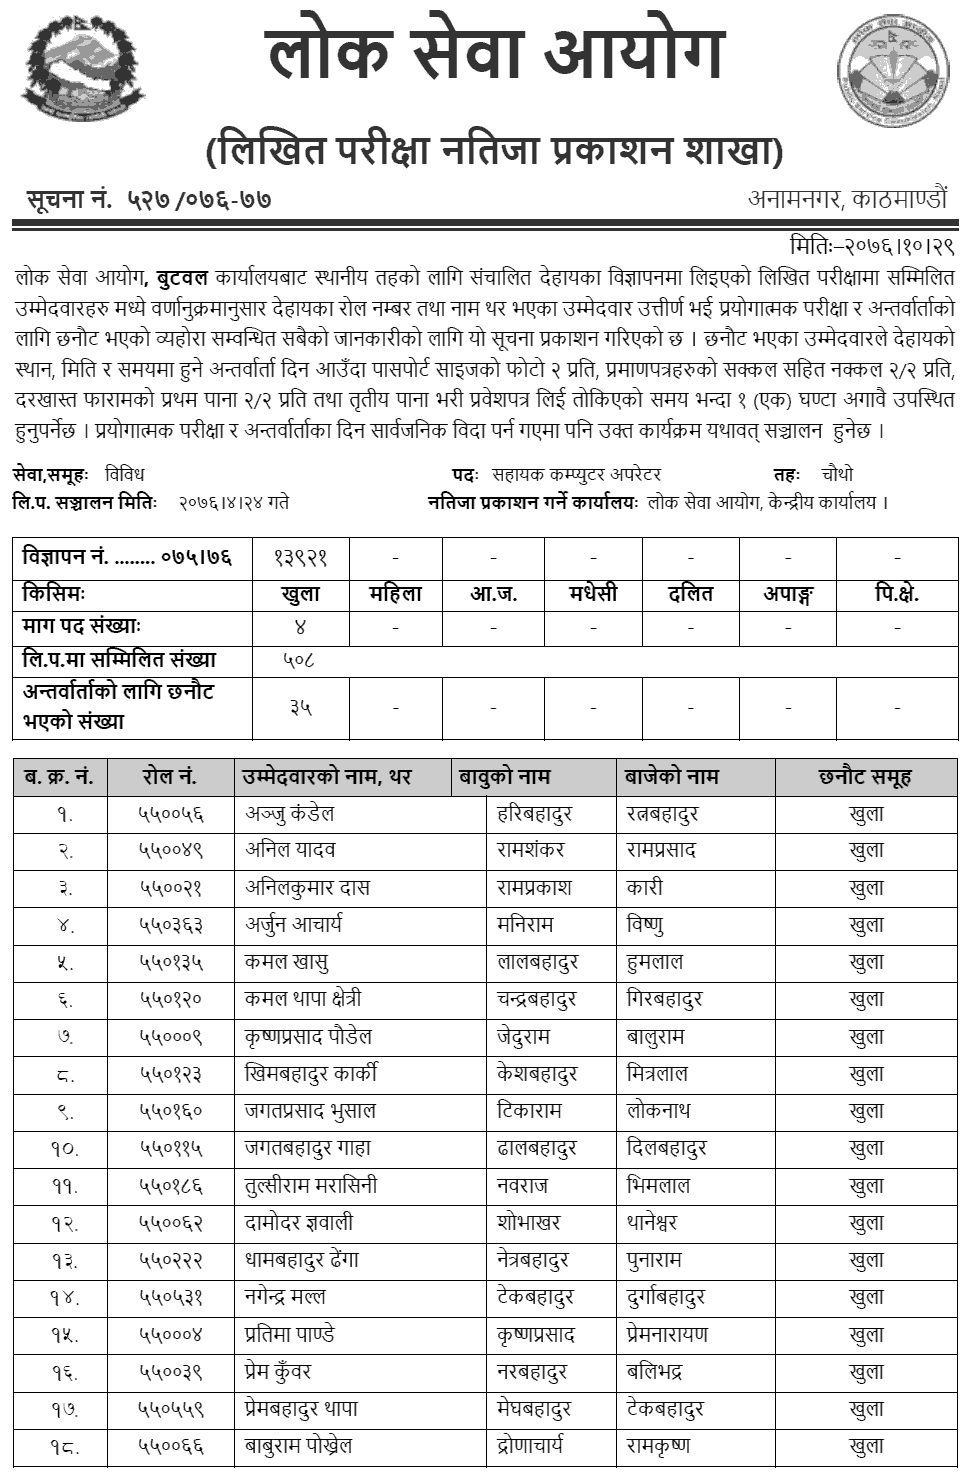 Lok Sewa Aayog Butwal Local Level 4th Assistant Computer Operator Written Exam Result